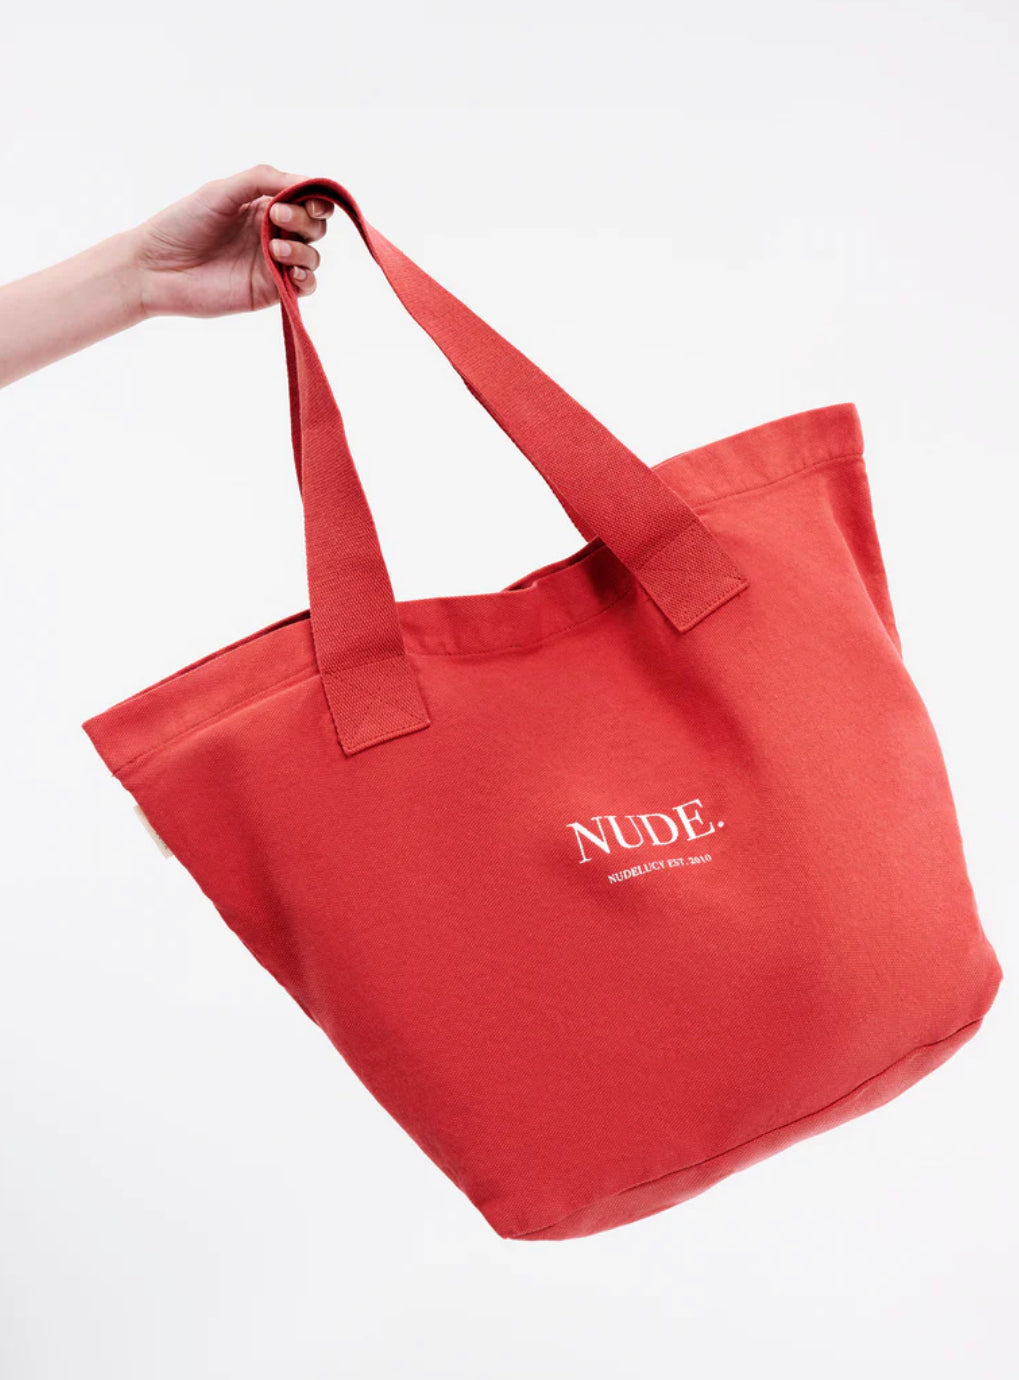 Nude Lucy - The NUDE Tote Bag